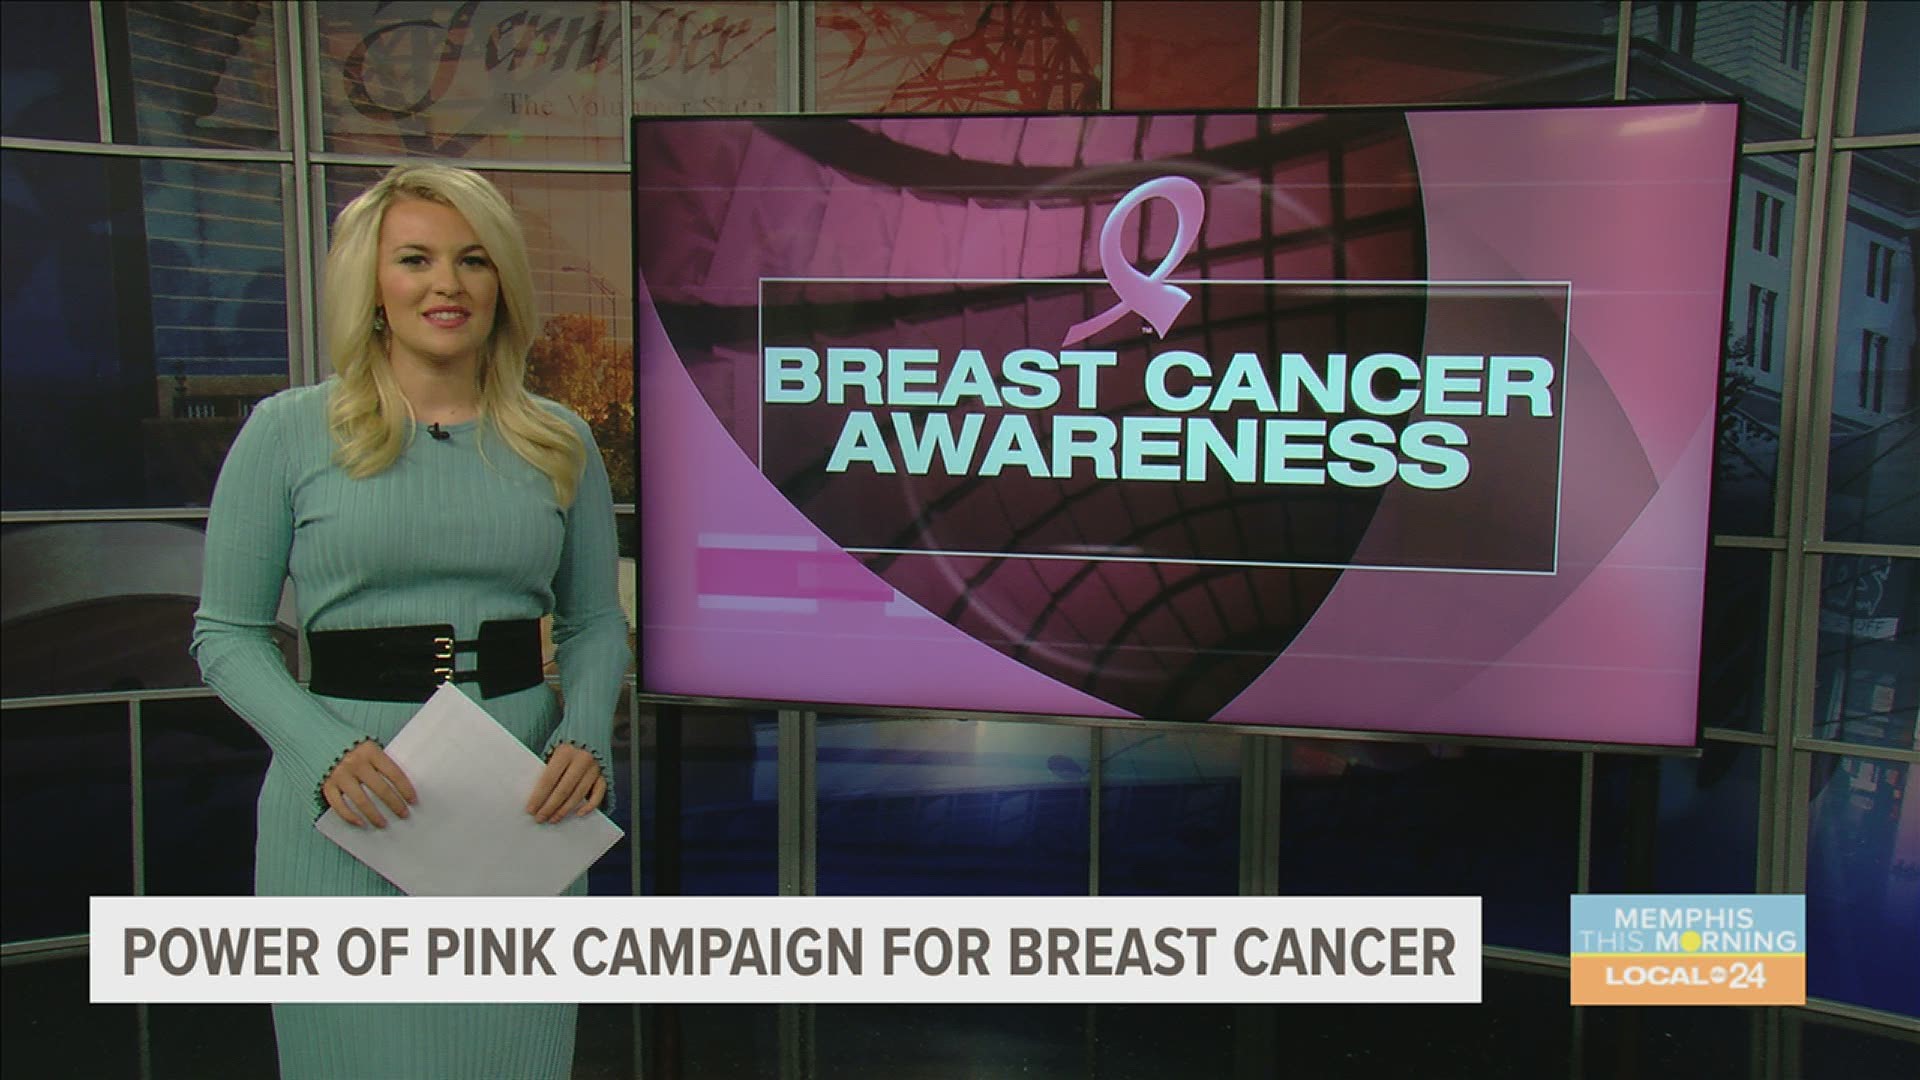 Breast Cancer Awareness Month kicks off Power of Pink campaign. For more information check American Cancer Society.